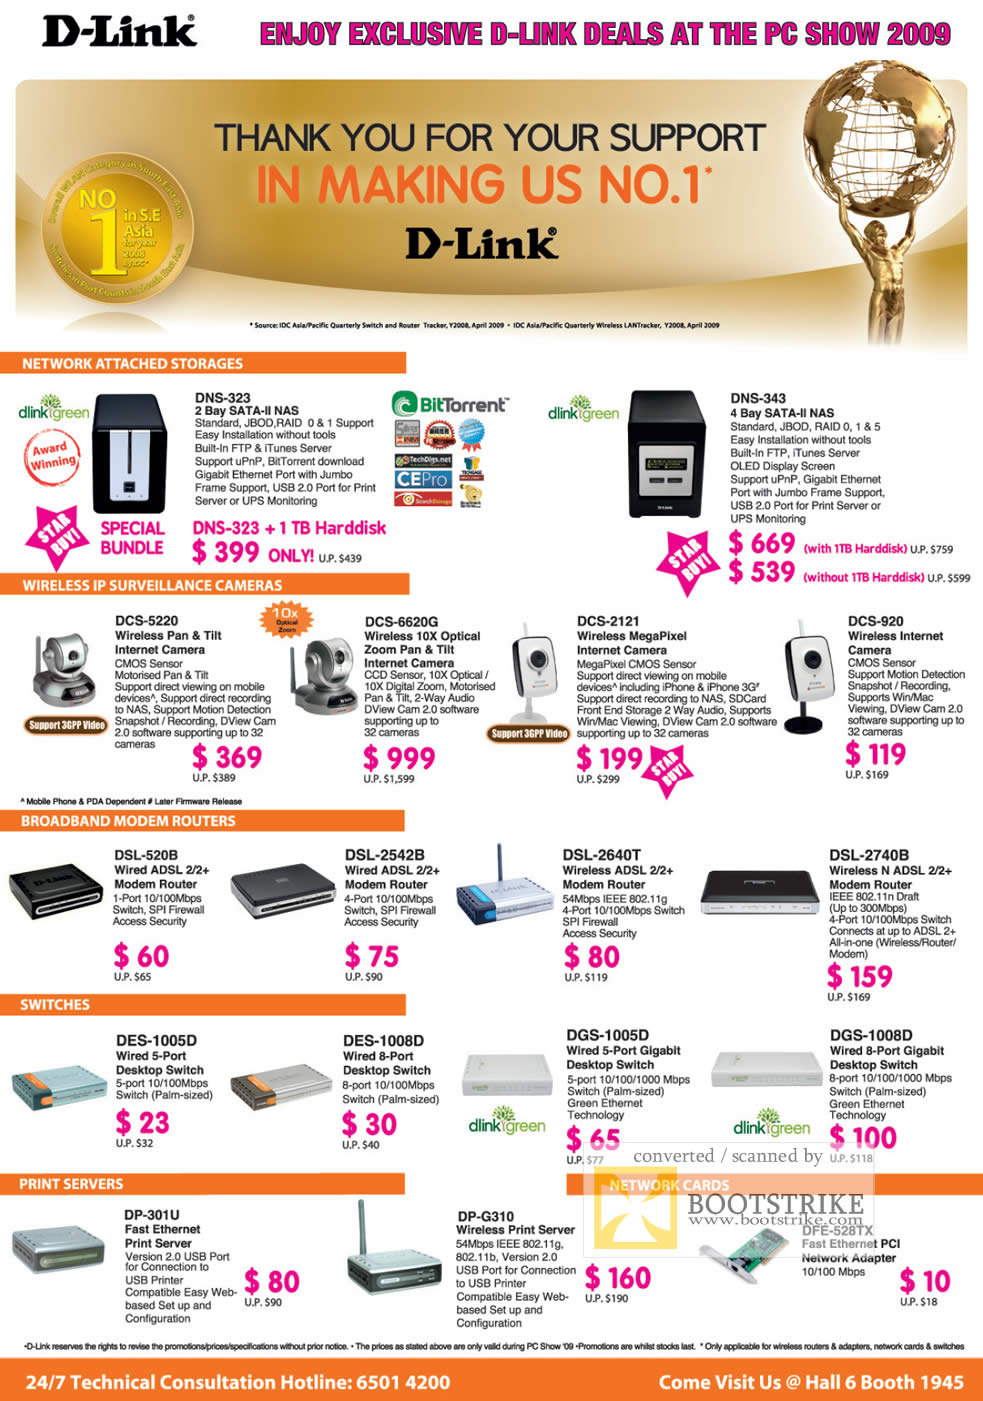 PC Show 2009 price list image brochure of D-Link Network Attached Storage NAS Wireless IP Surveillance Cameras Modem Routers Switches Print Servers